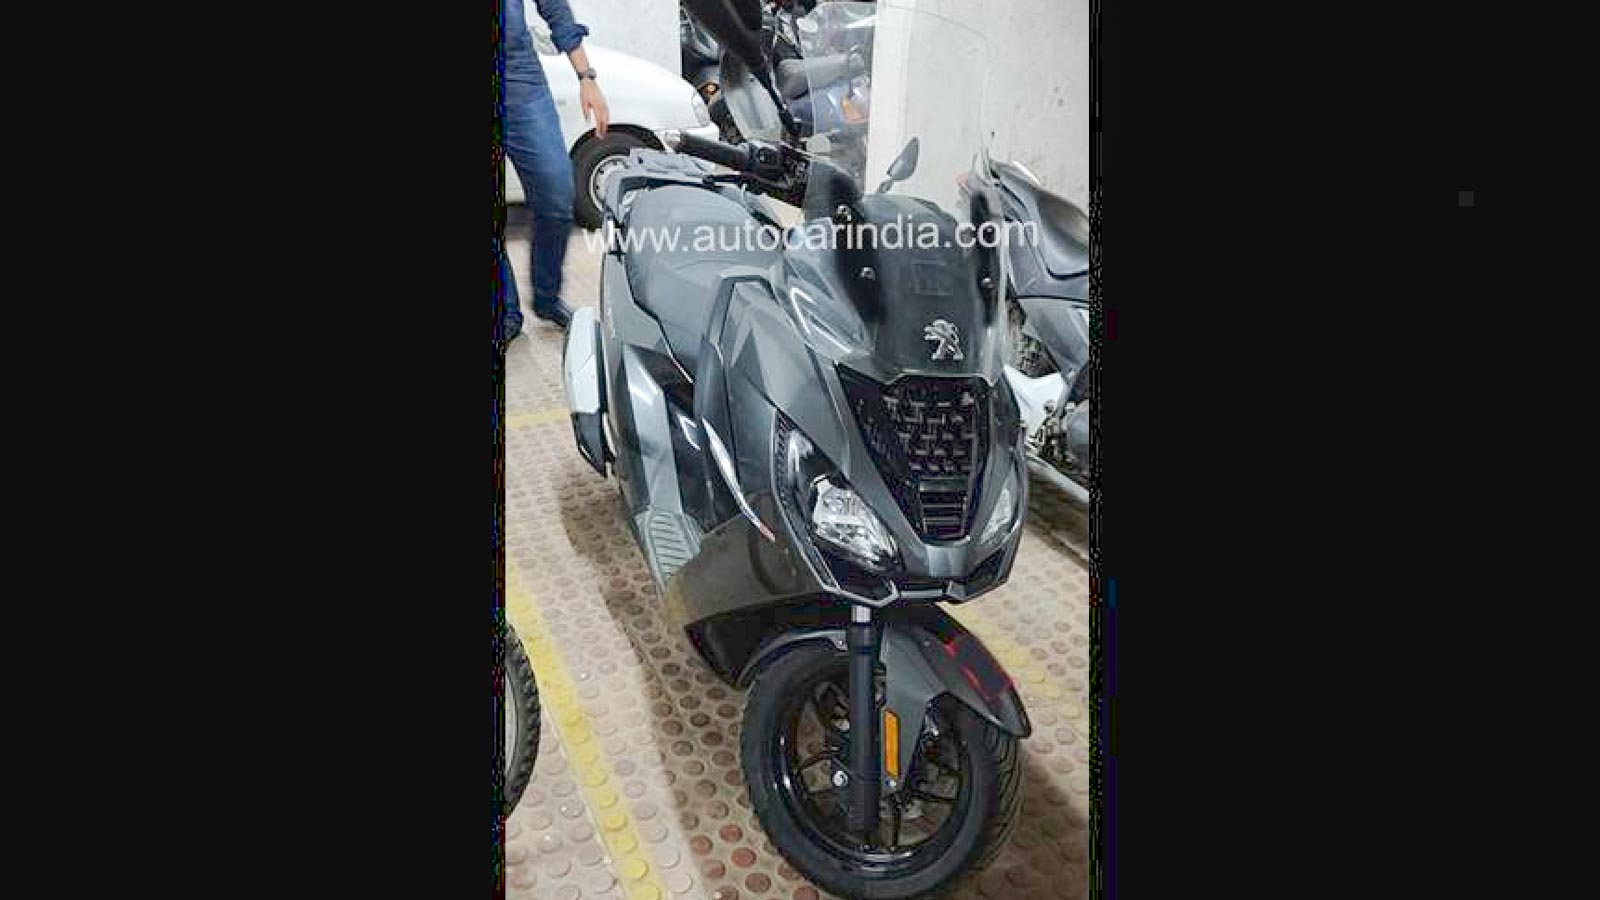 Mahindra testing 125cc scooter in - Spied